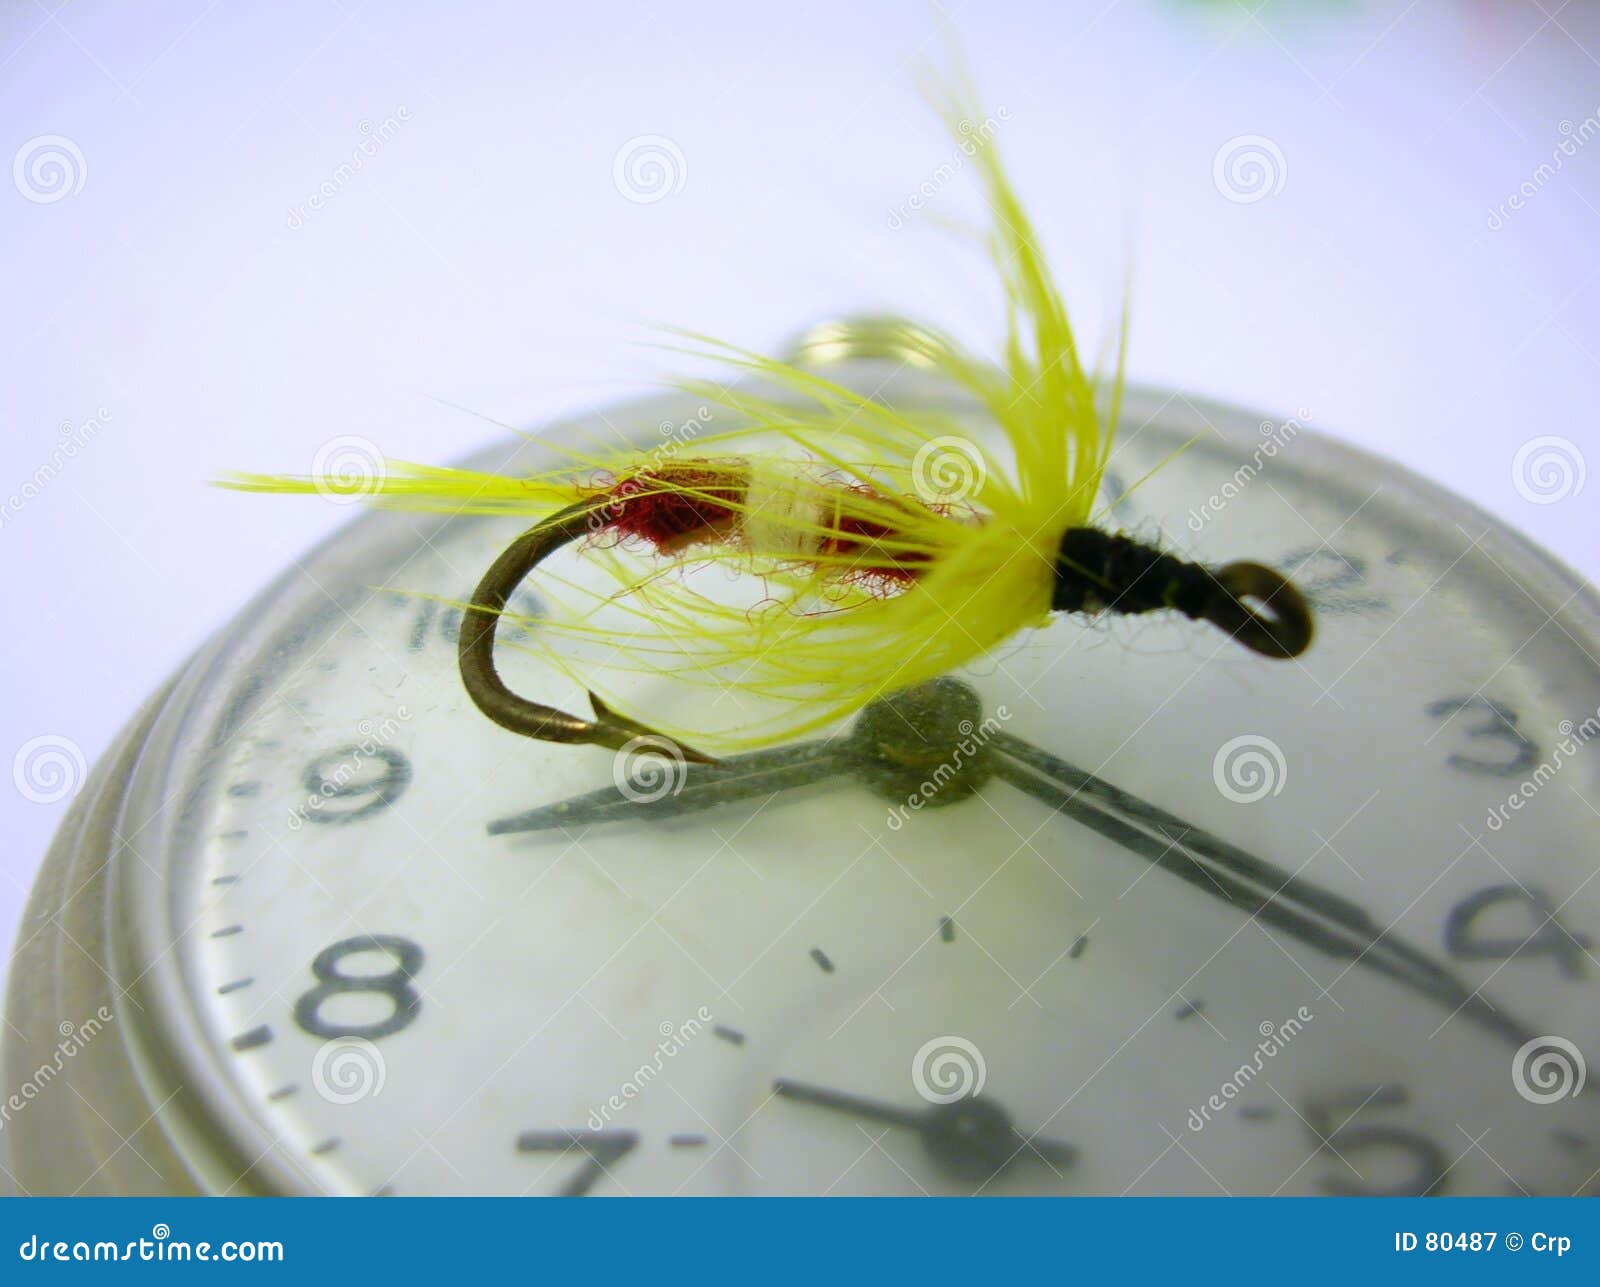 266 Angler Tying Fishing Line Stock Photos - Free & Royalty-Free Stock  Photos from Dreamstime